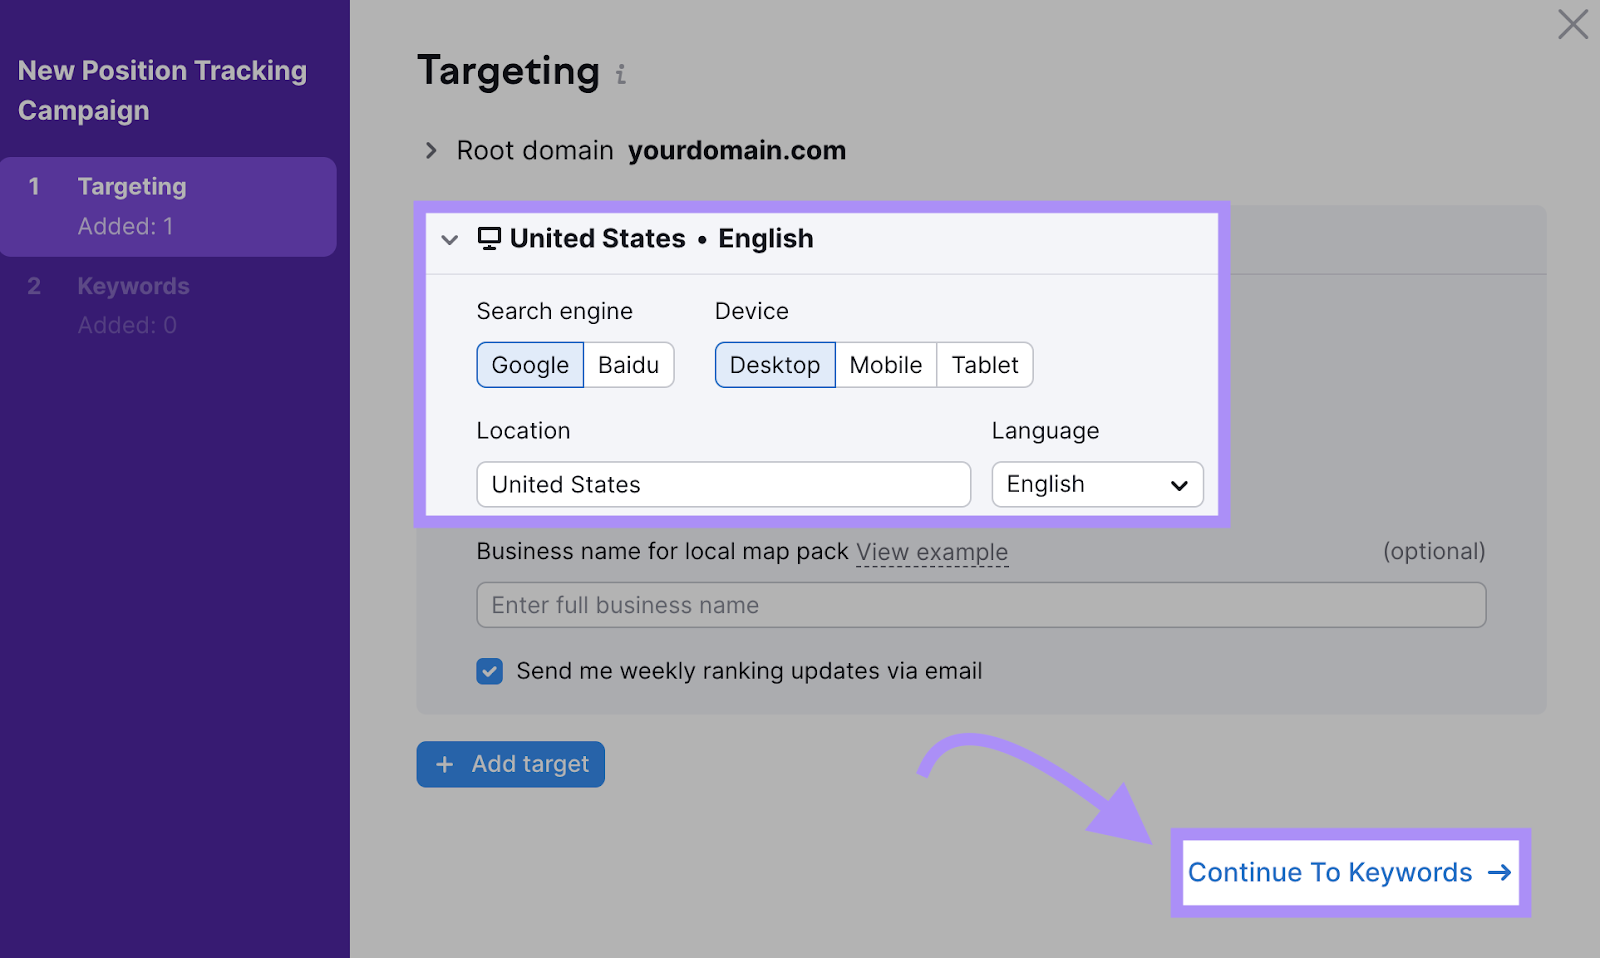 "Targeting" settings window in Position Tracking tool